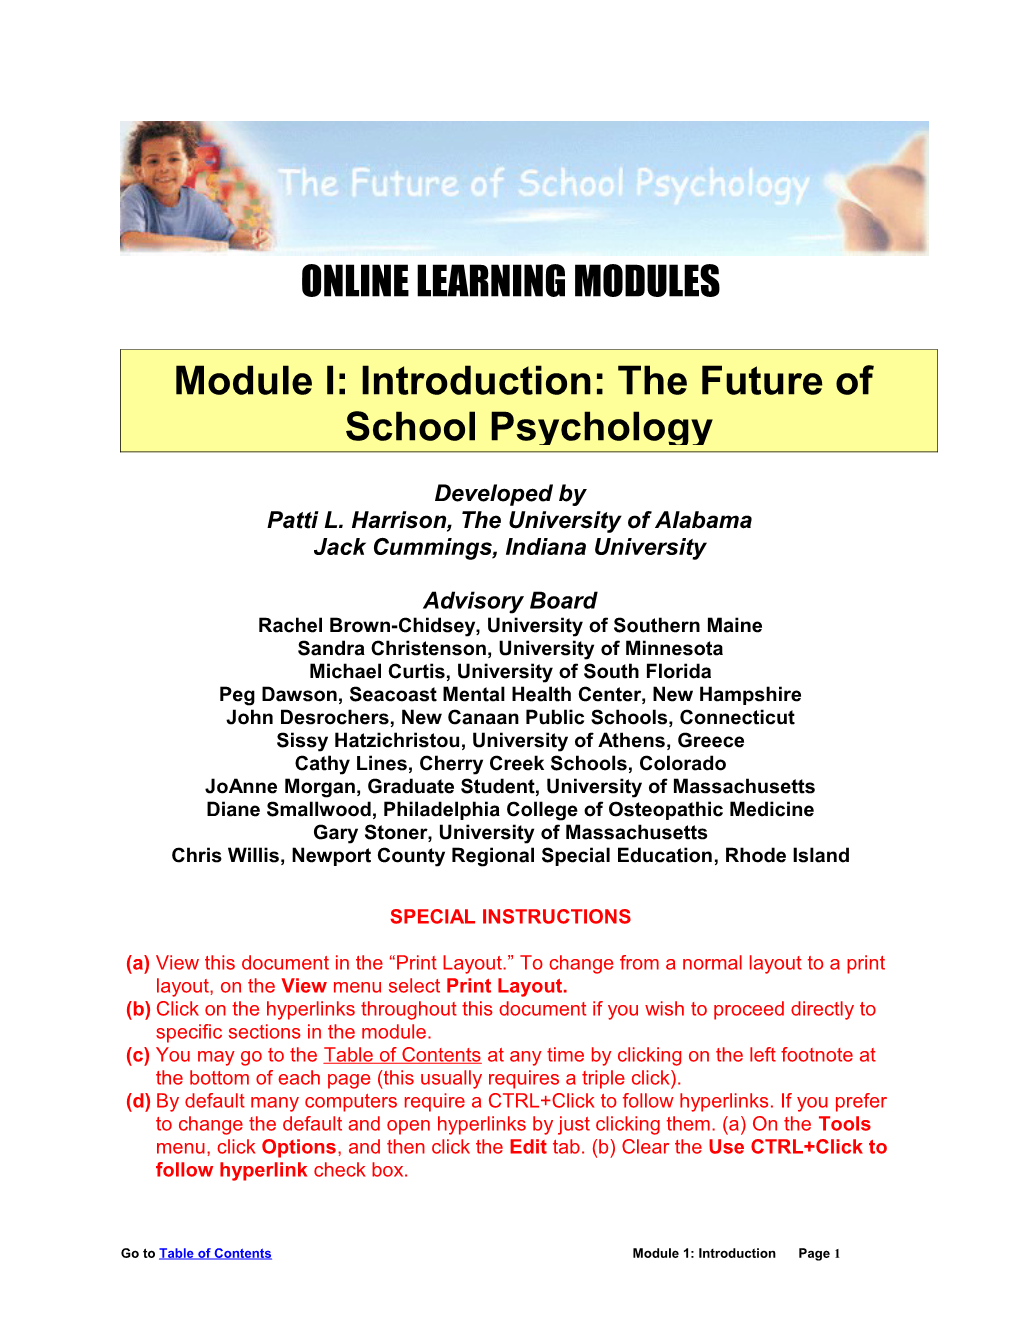 Module I: Introduction: the Future of School Psychology